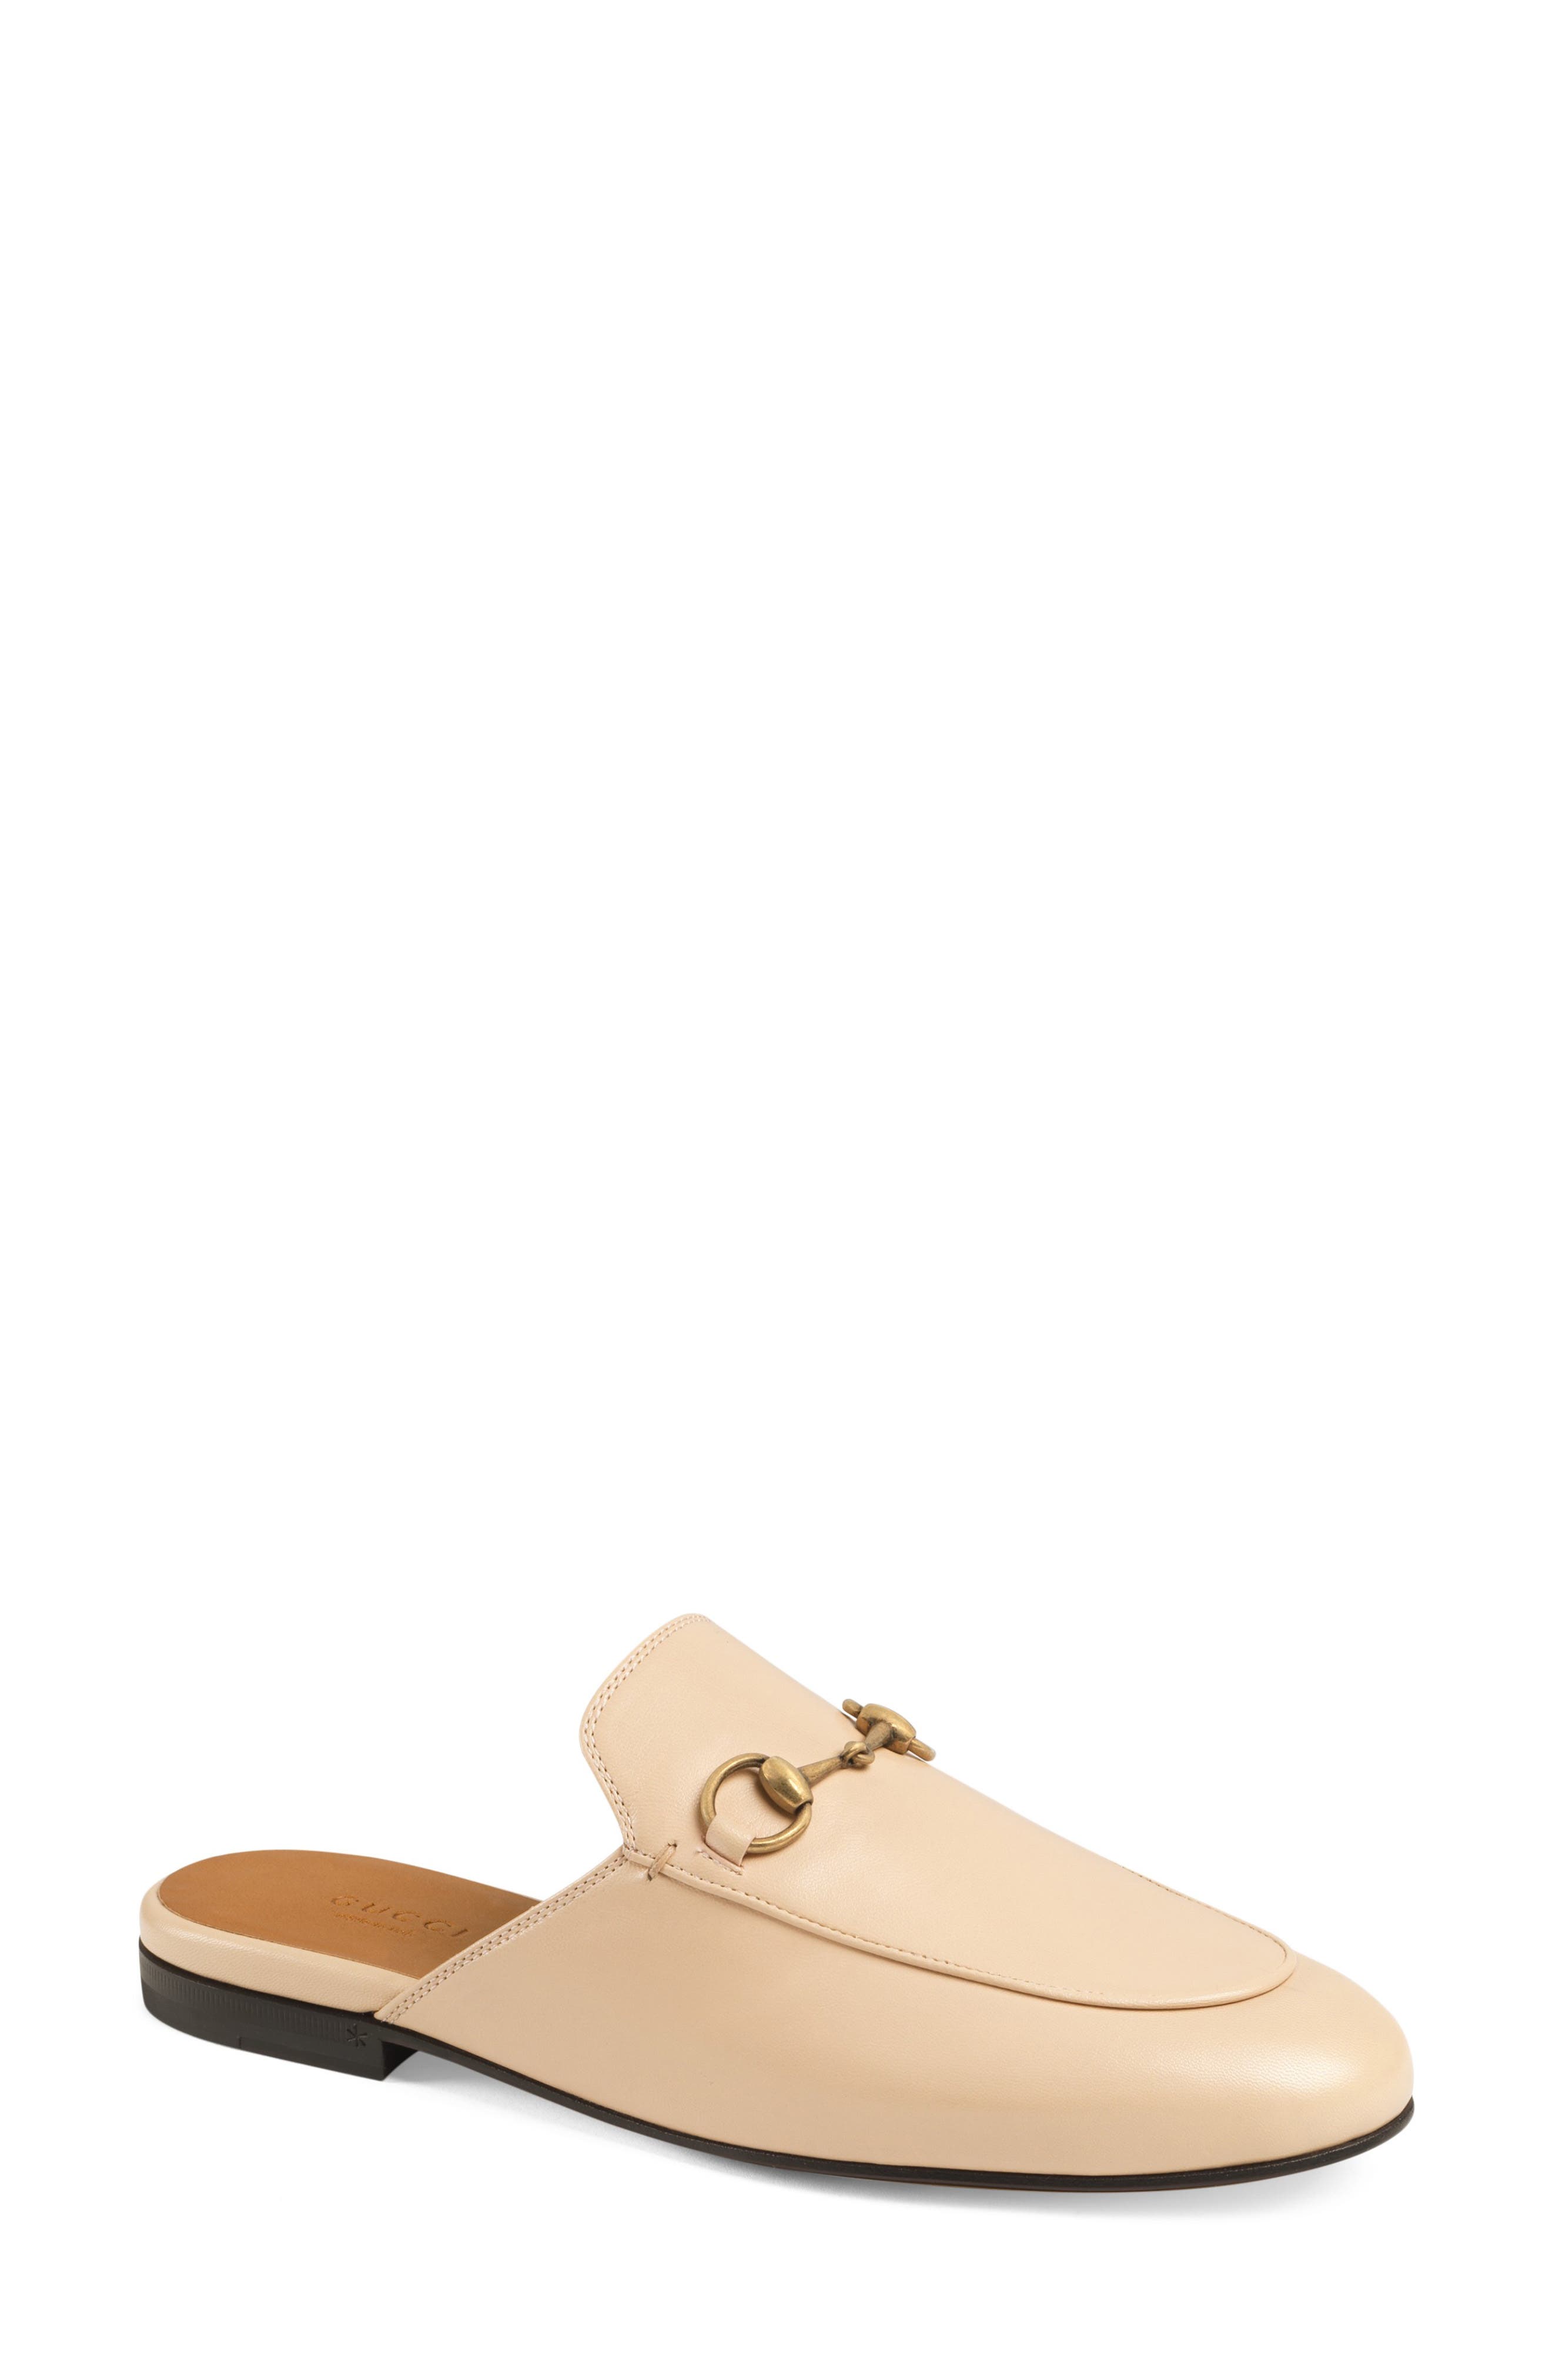 Gucci Princetown Loafer Mule (Women 